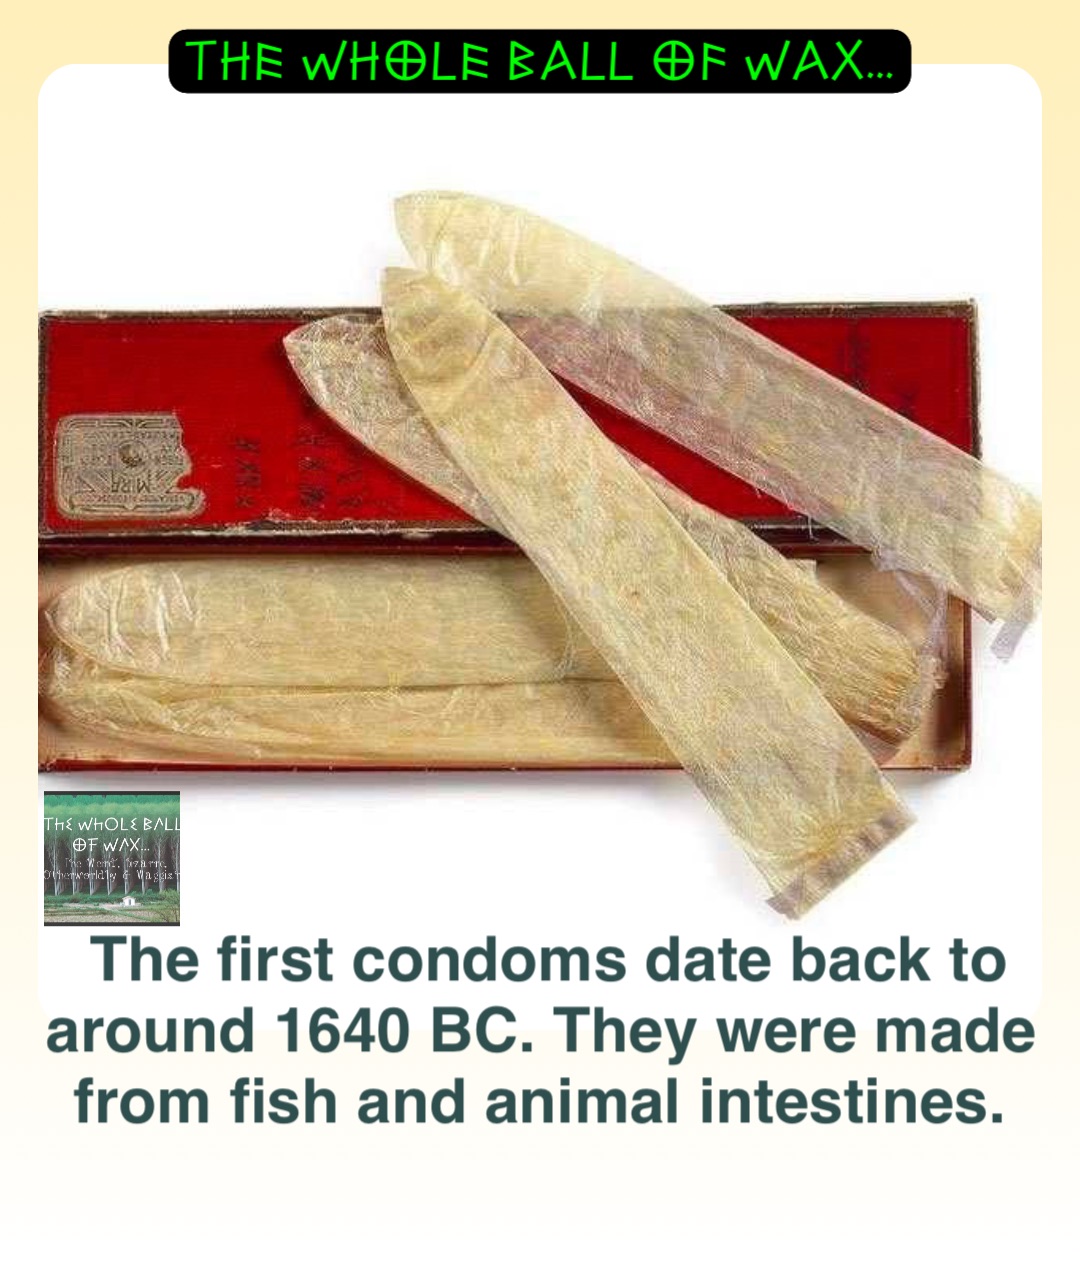 The first condoms date back to around 1640 BC. They were made from fish and animal intestines.